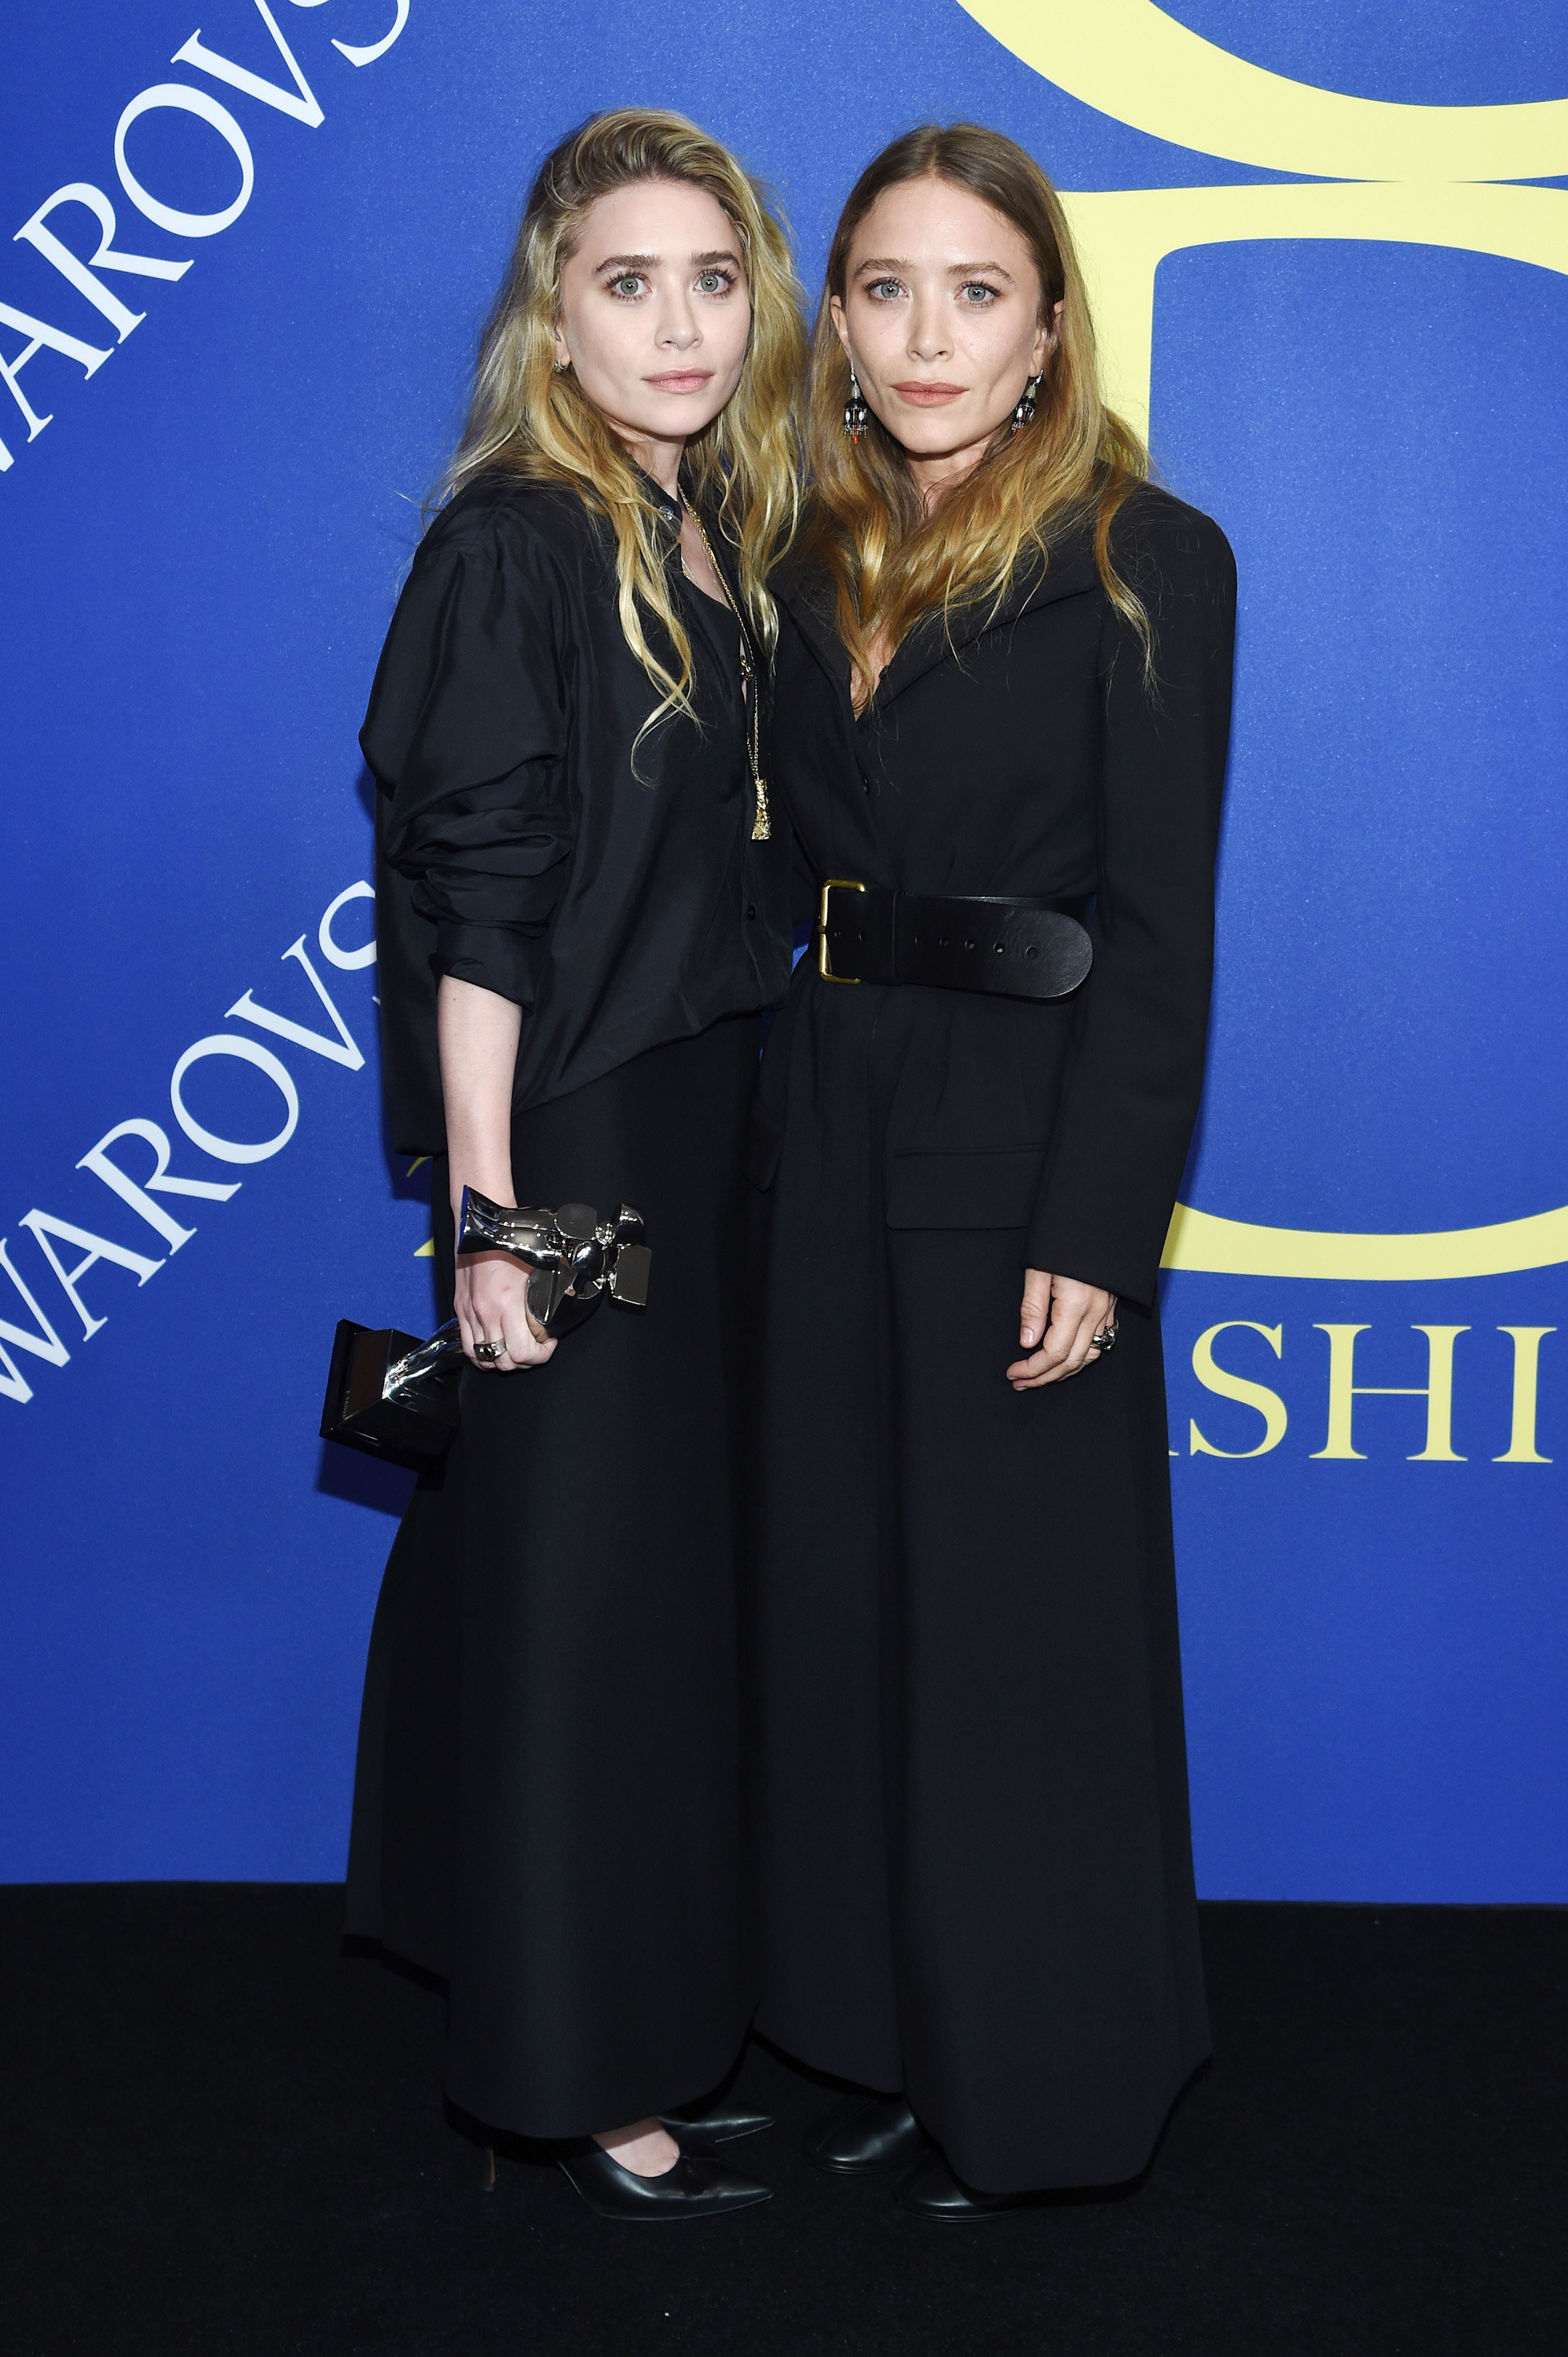 Ashley Olsen and Mary-Kate Olsen at the CFDA Fashion awards in 2018